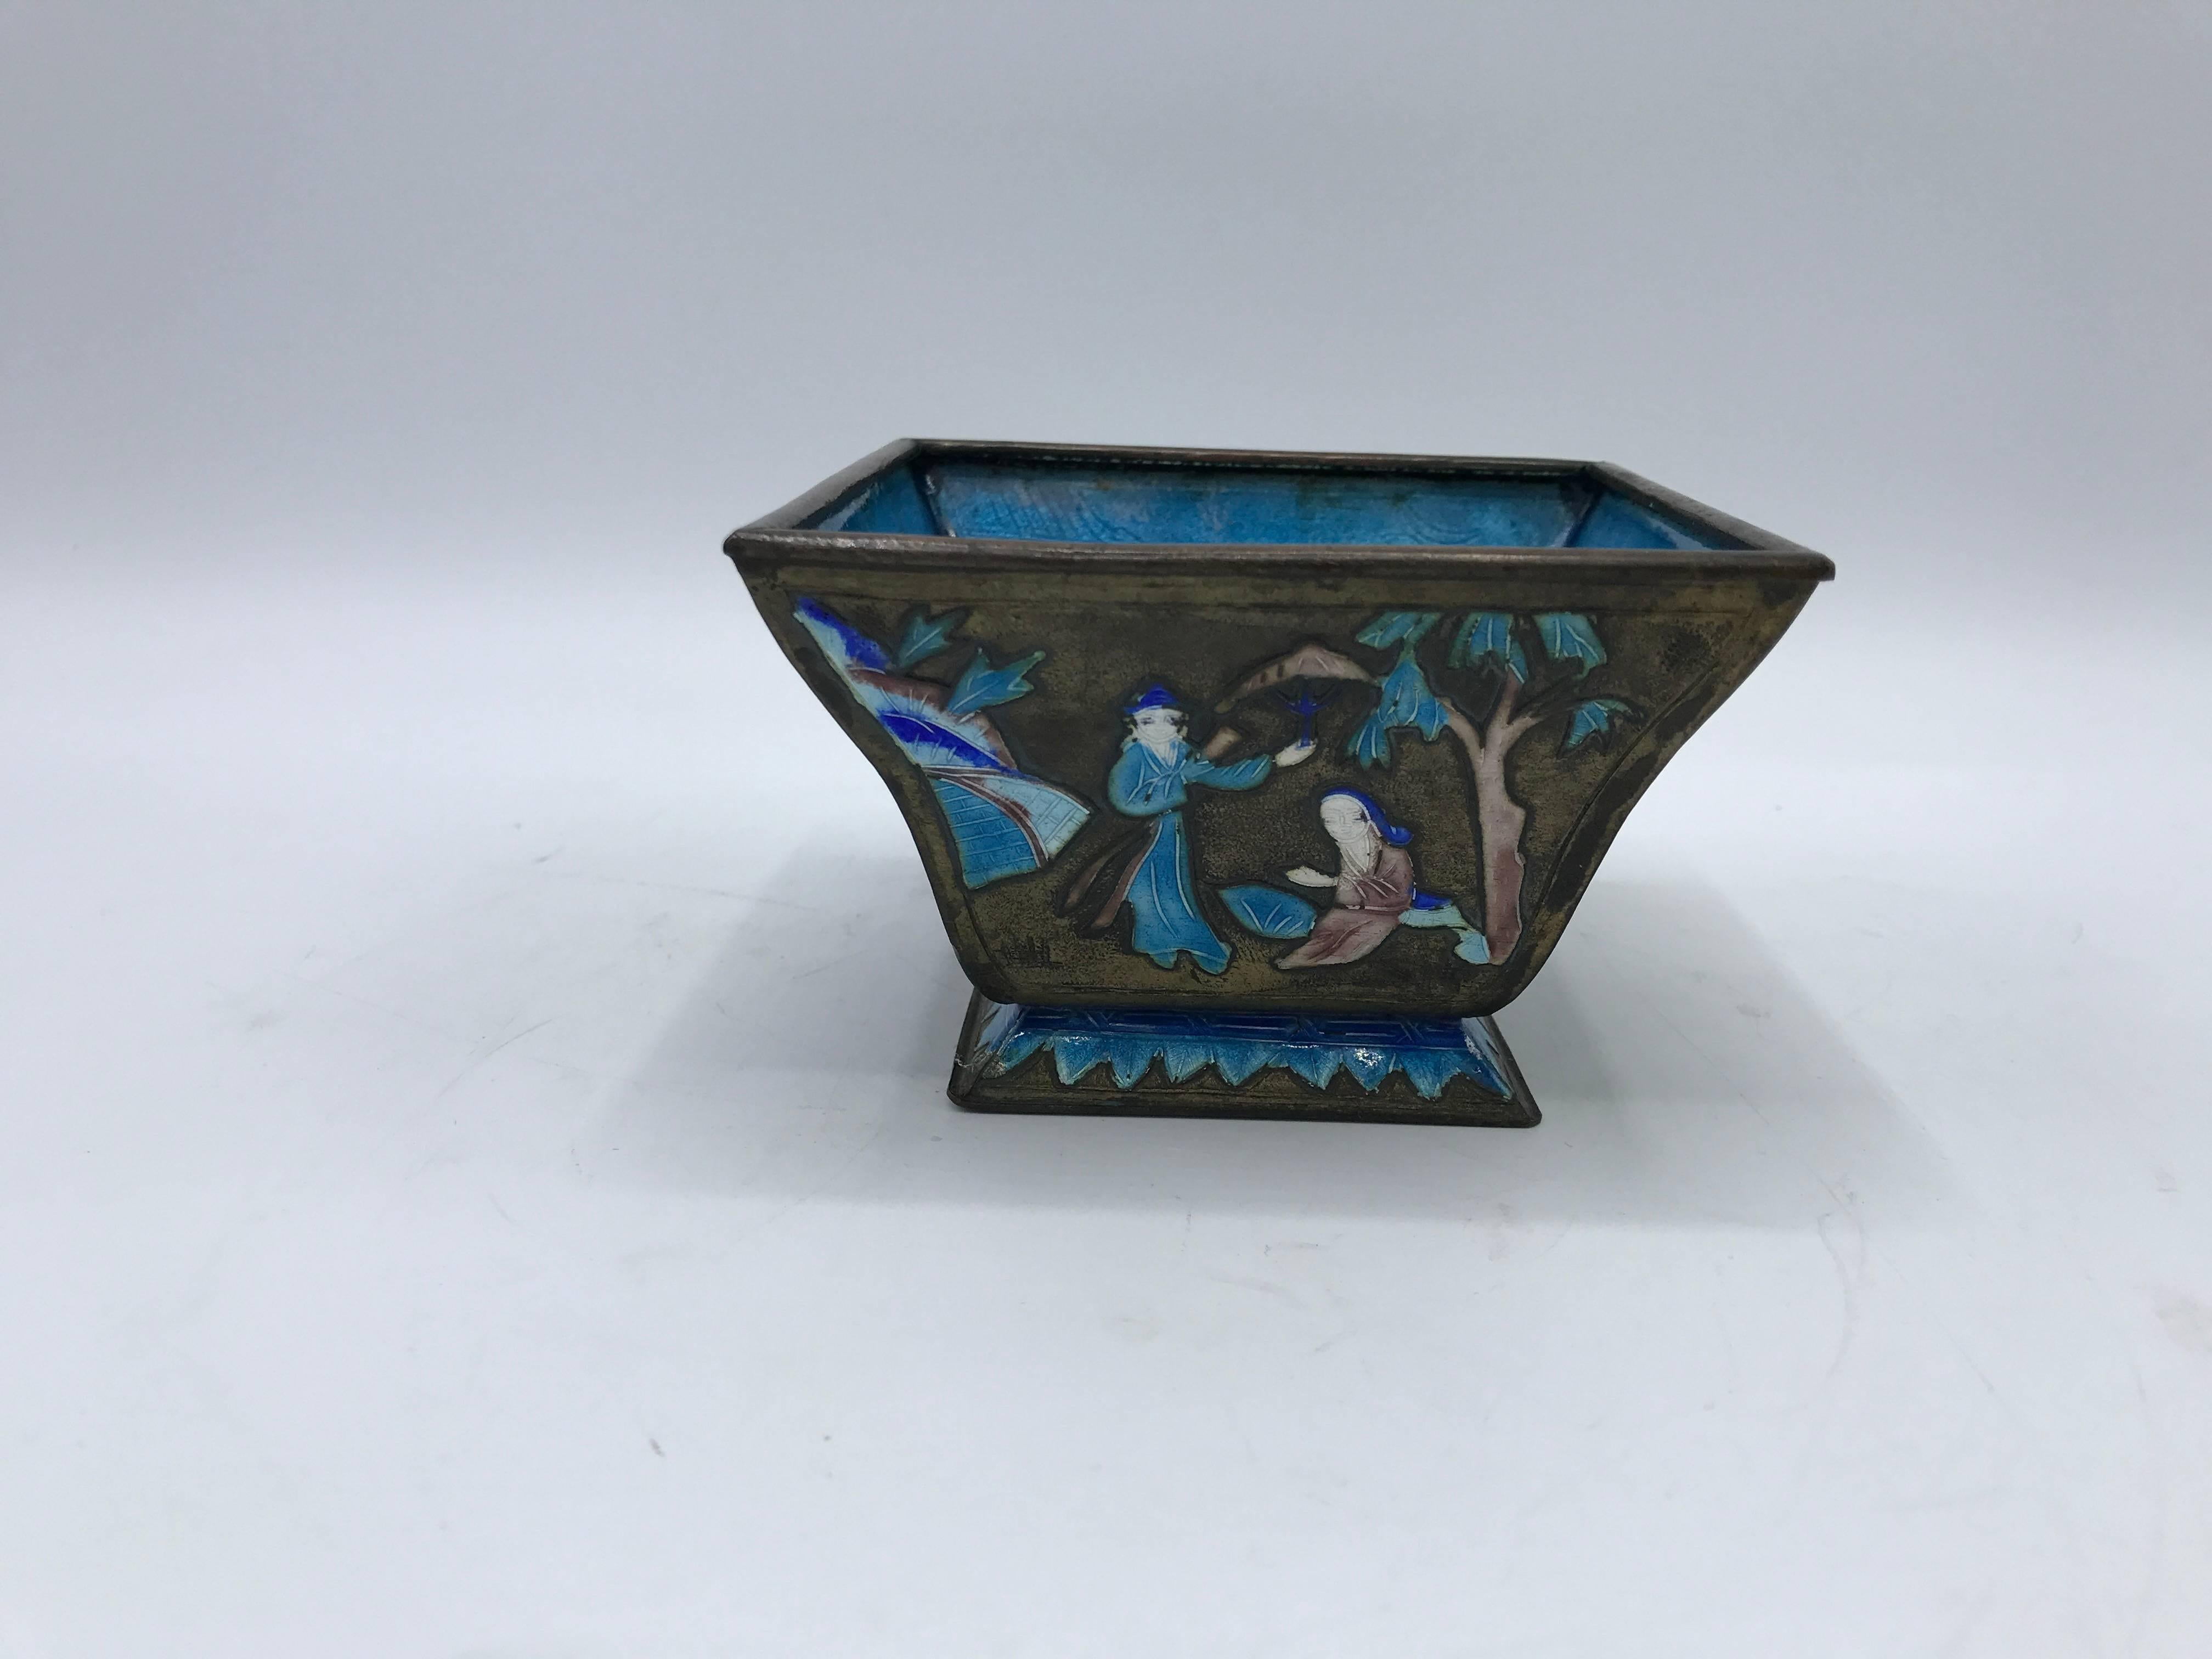 Offered is a beautiful, 1950s square cloisonné bowl.